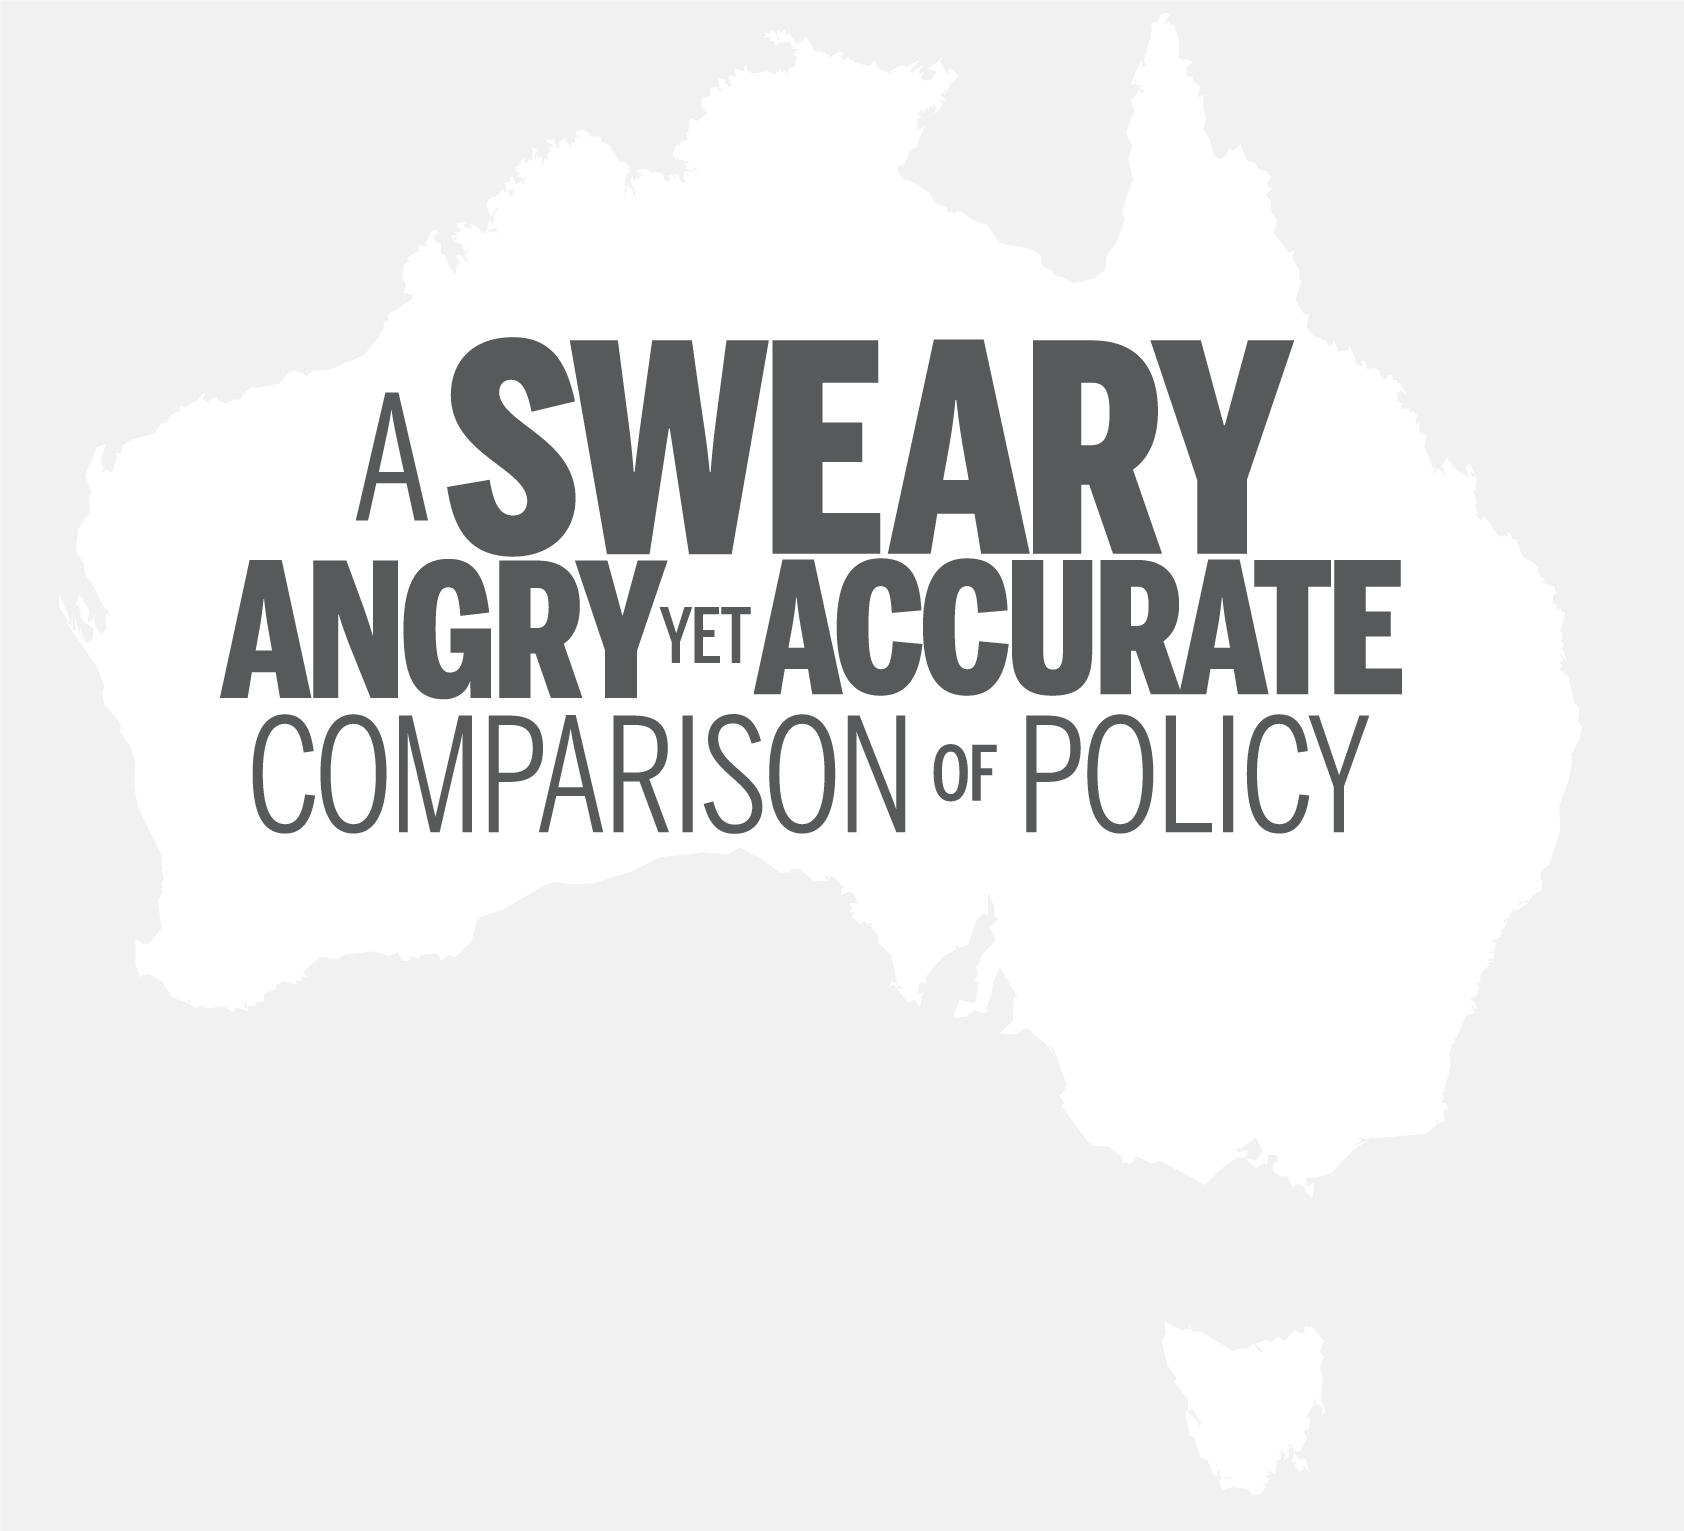 A SWEARY, ANGRY, yet ACCURATE comparison of policy.